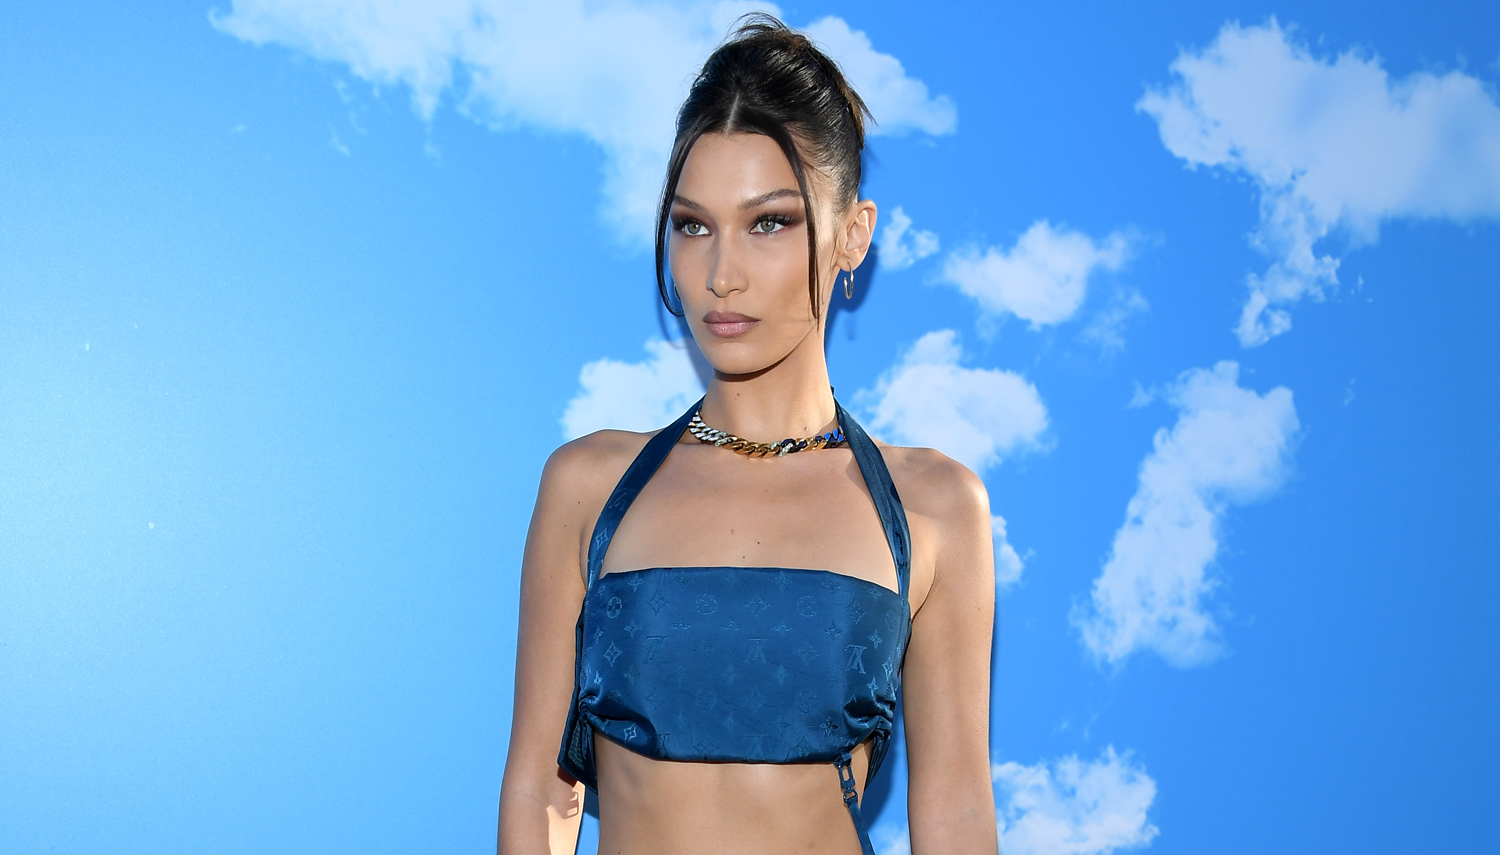 Low Rider In Louis Vuitton, Bella Hadid Revisits The 2000s With